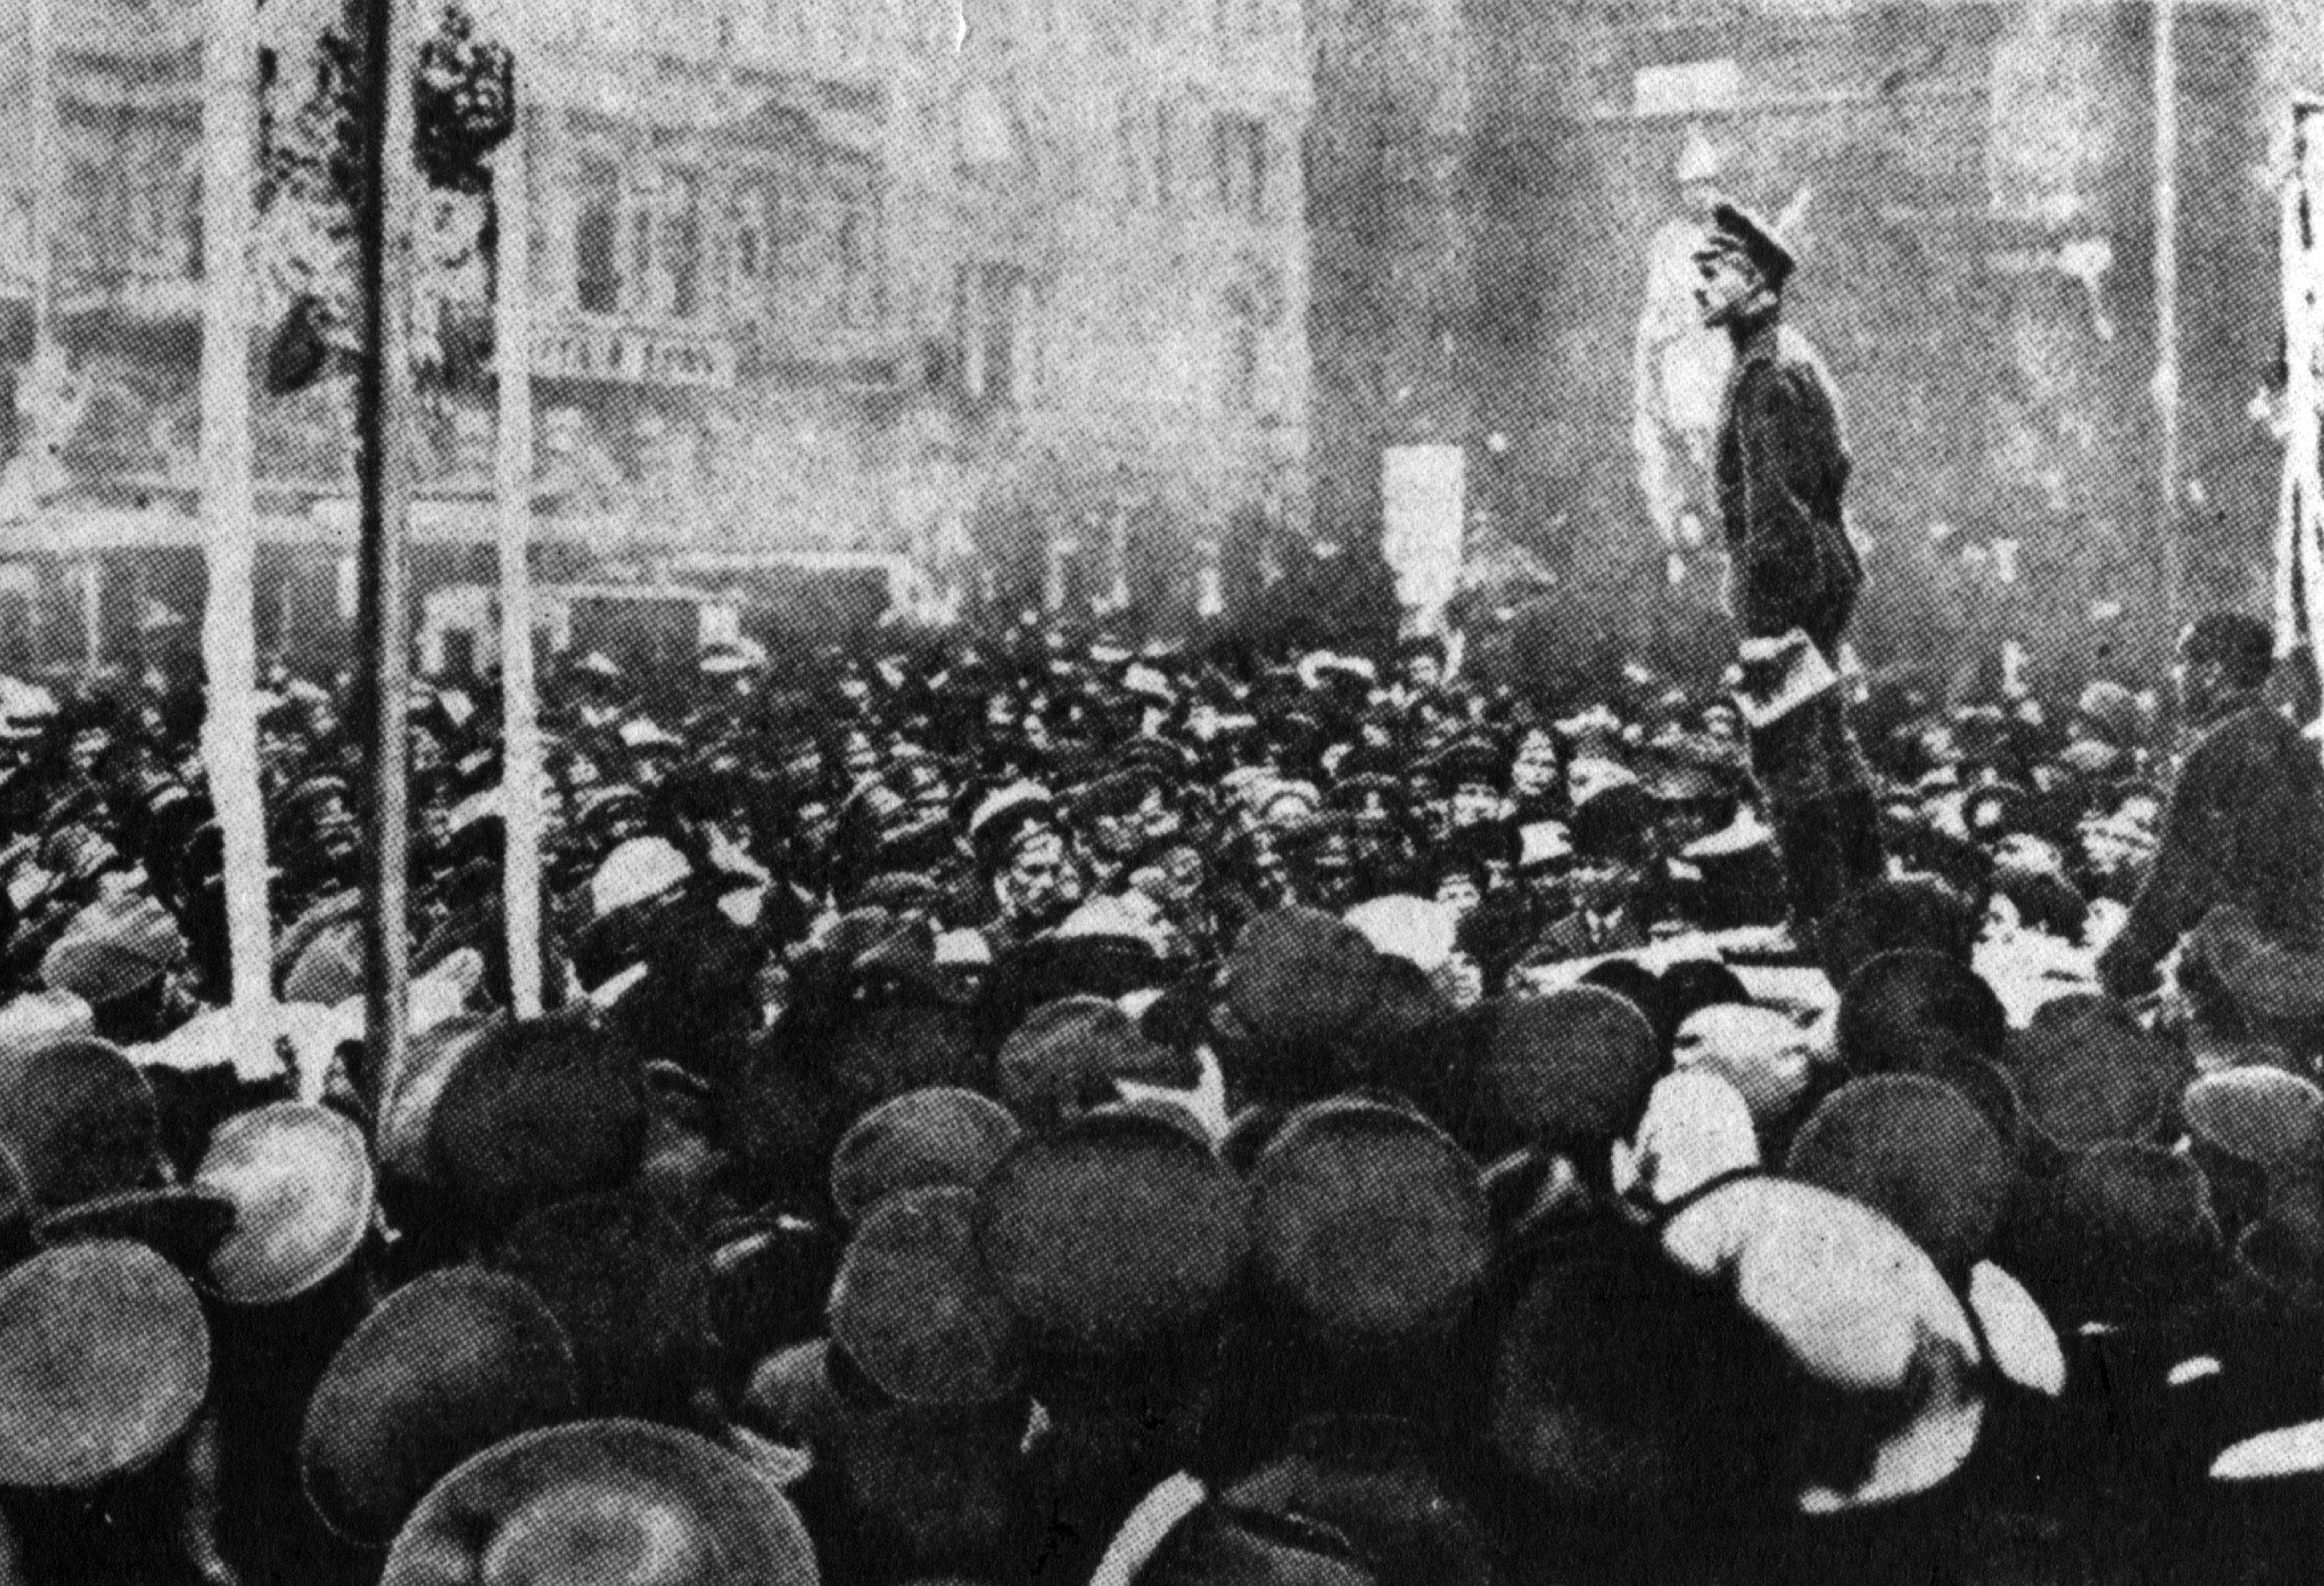 Four reasons everyone should study the Russian revolution